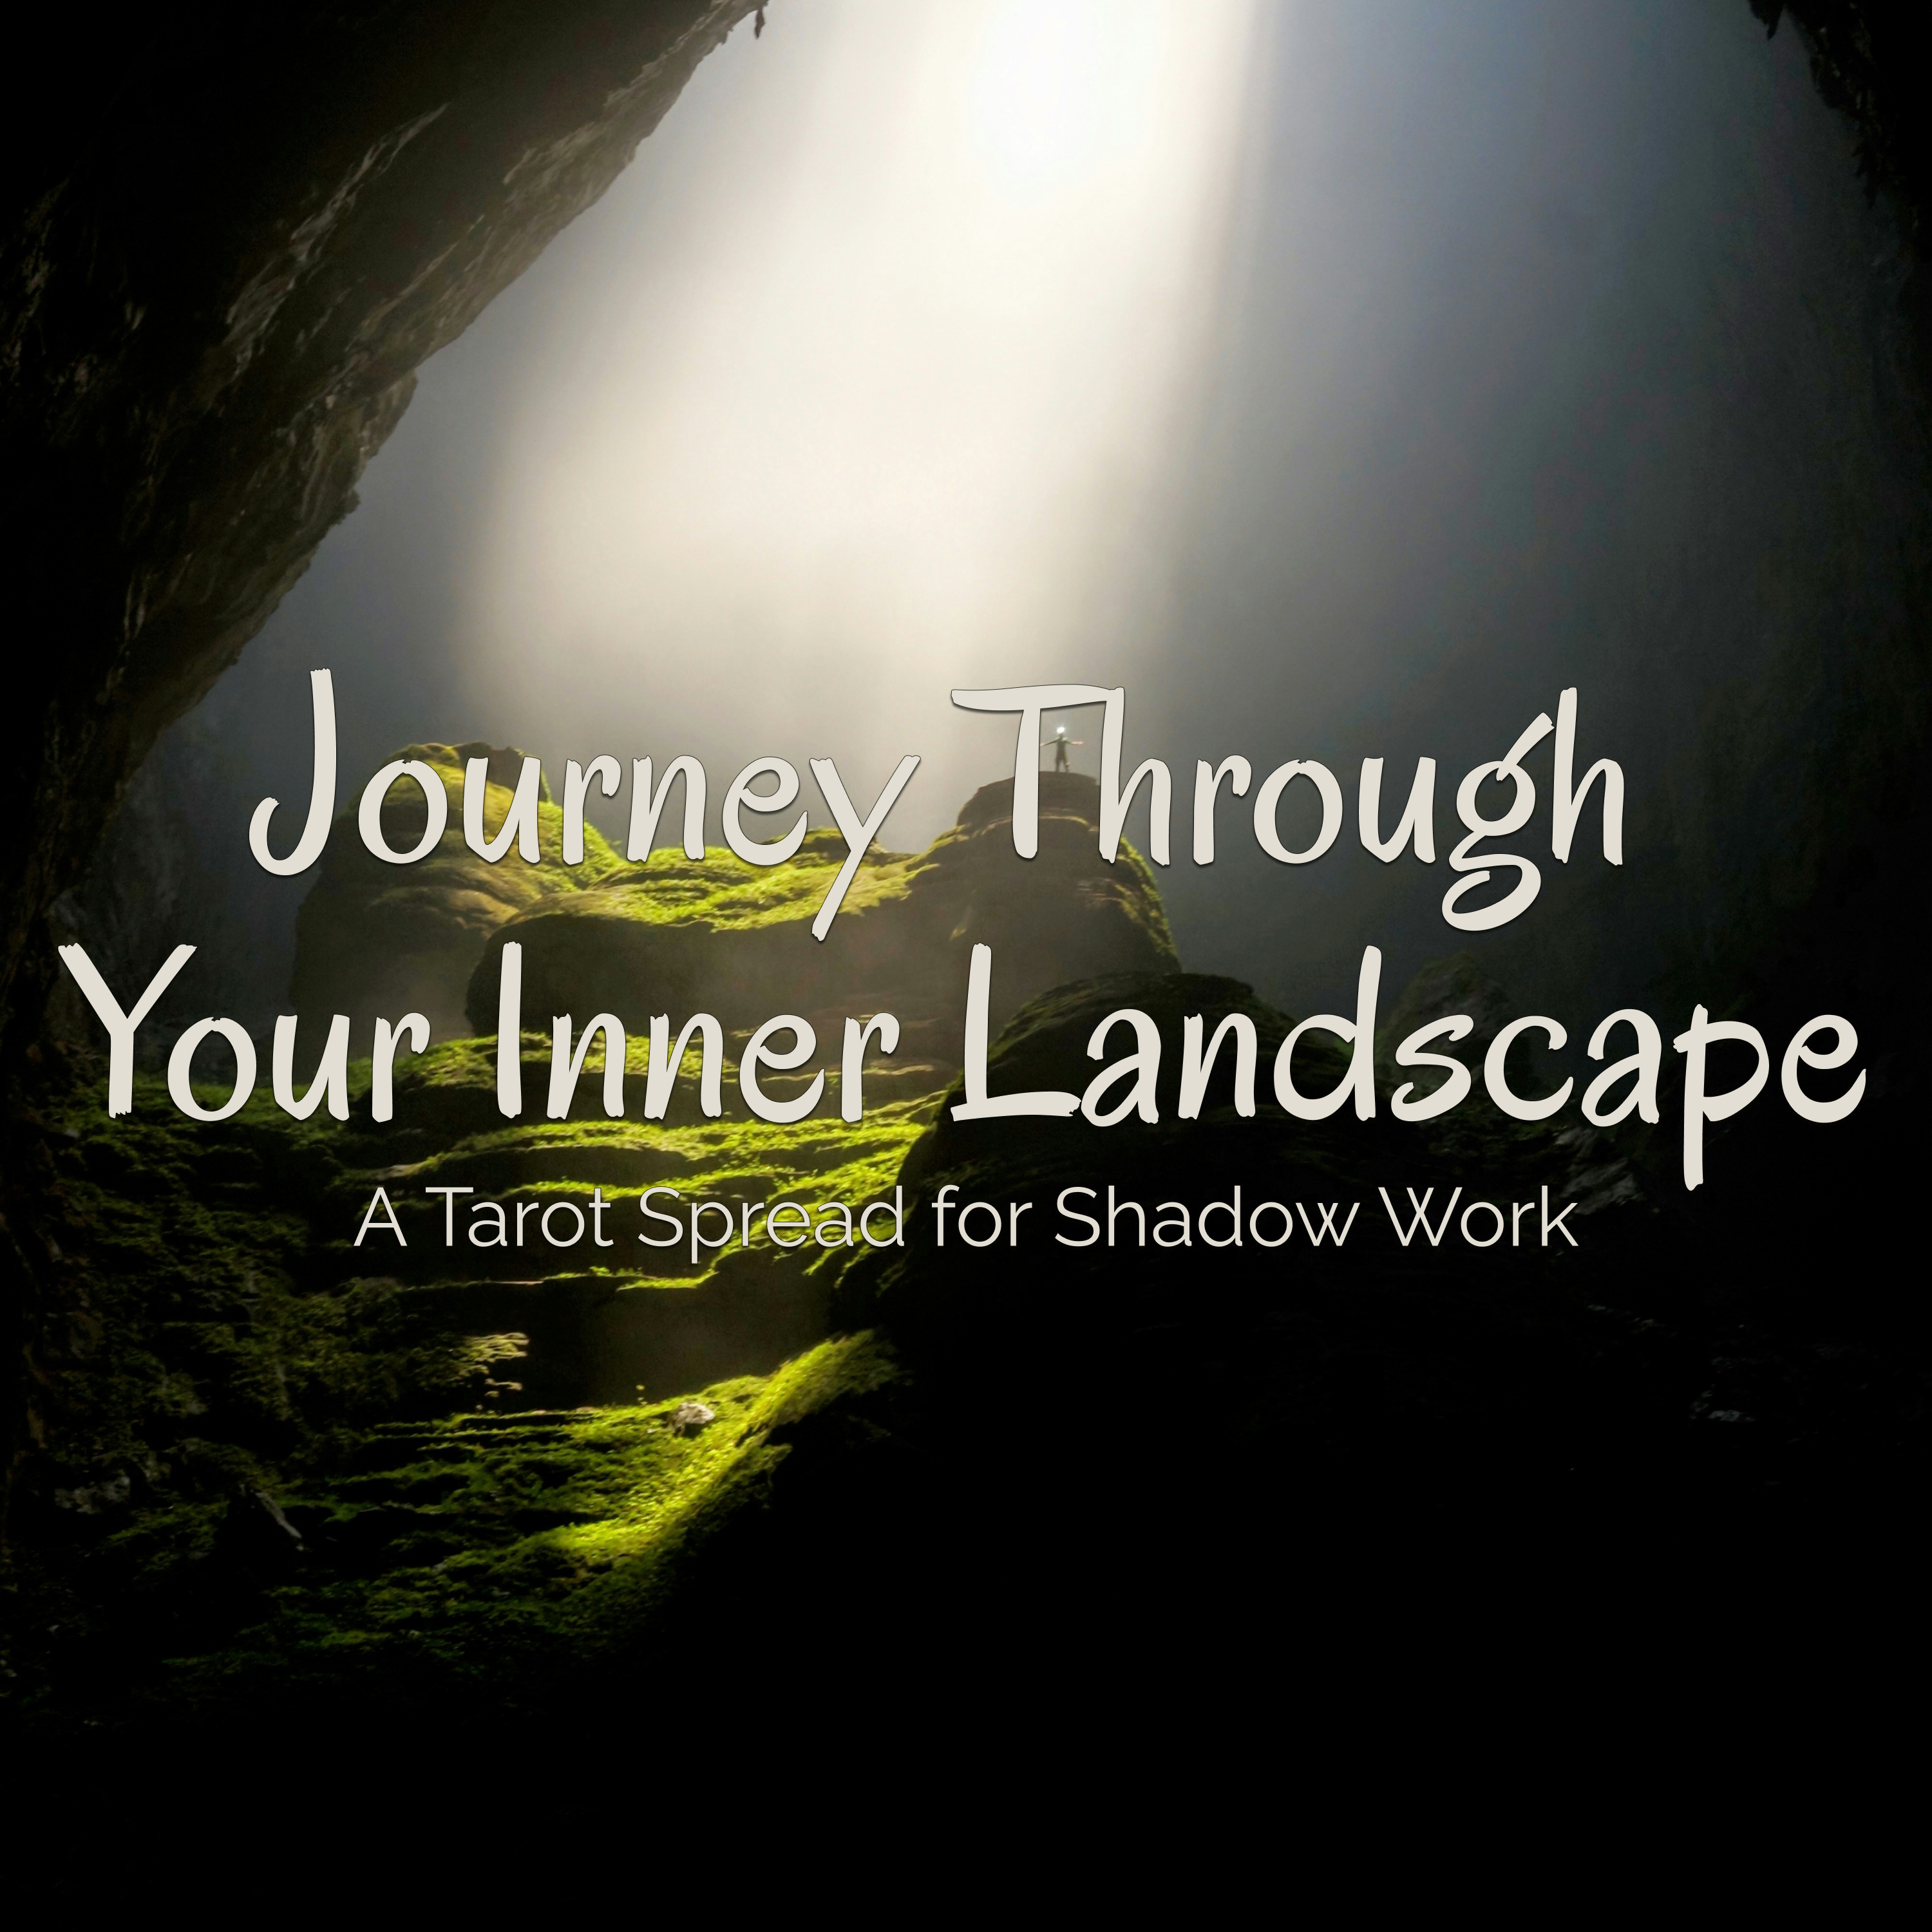 Journey Through Your Inner Landscape - A Tarot Spread for Shadow Work